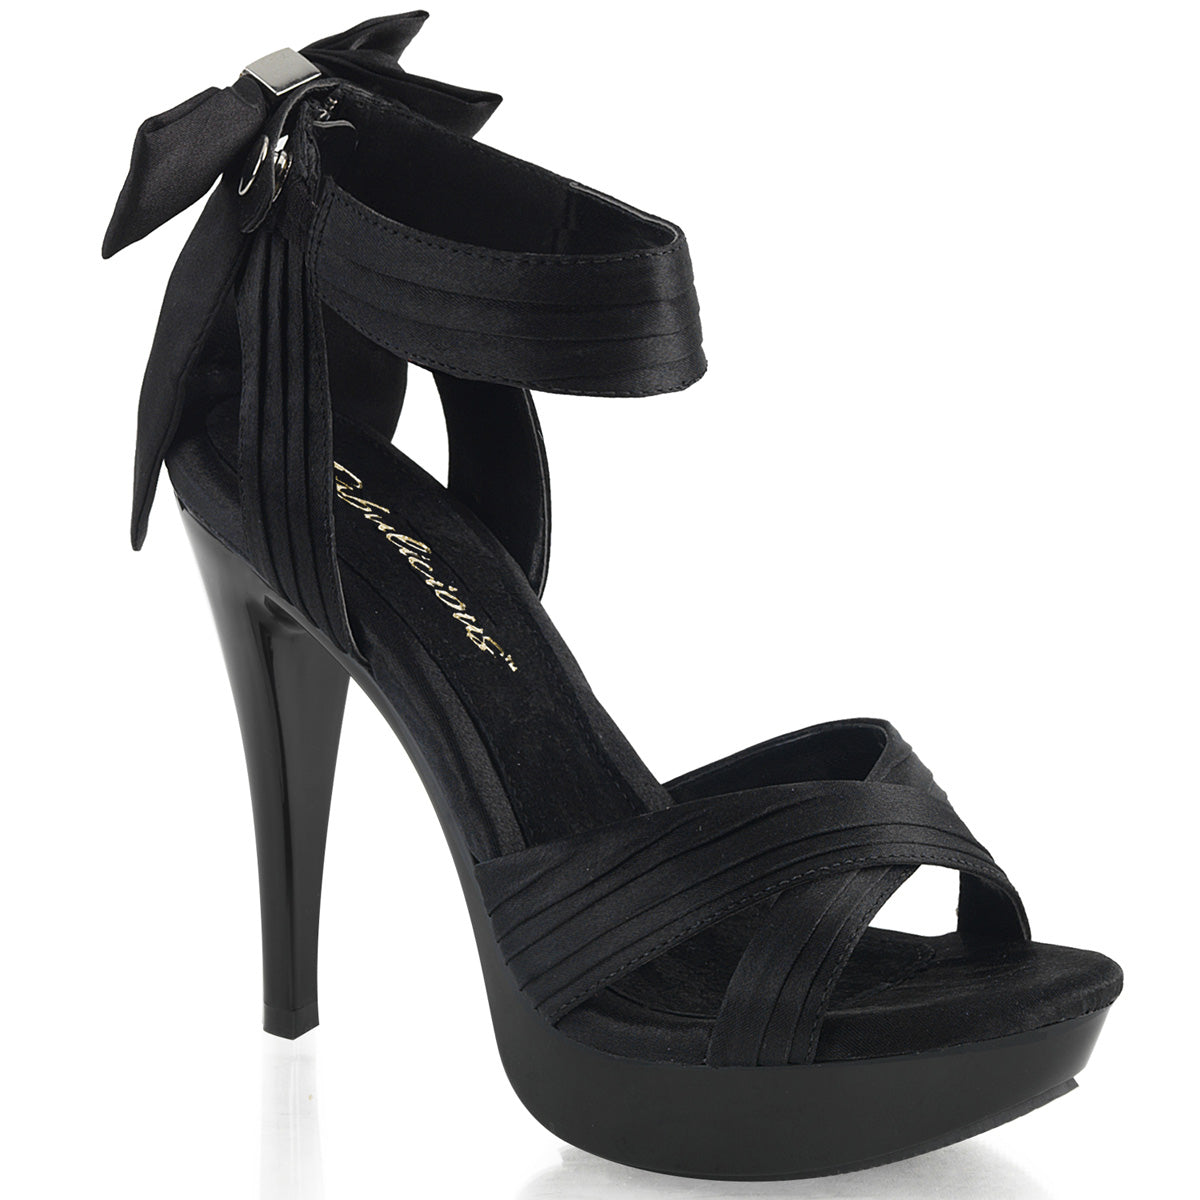 COCKTAIL-568 Fabulicious 5 Inch Heel Black Satin Sexy Shoes-Fabulicious- Sexy Shoes